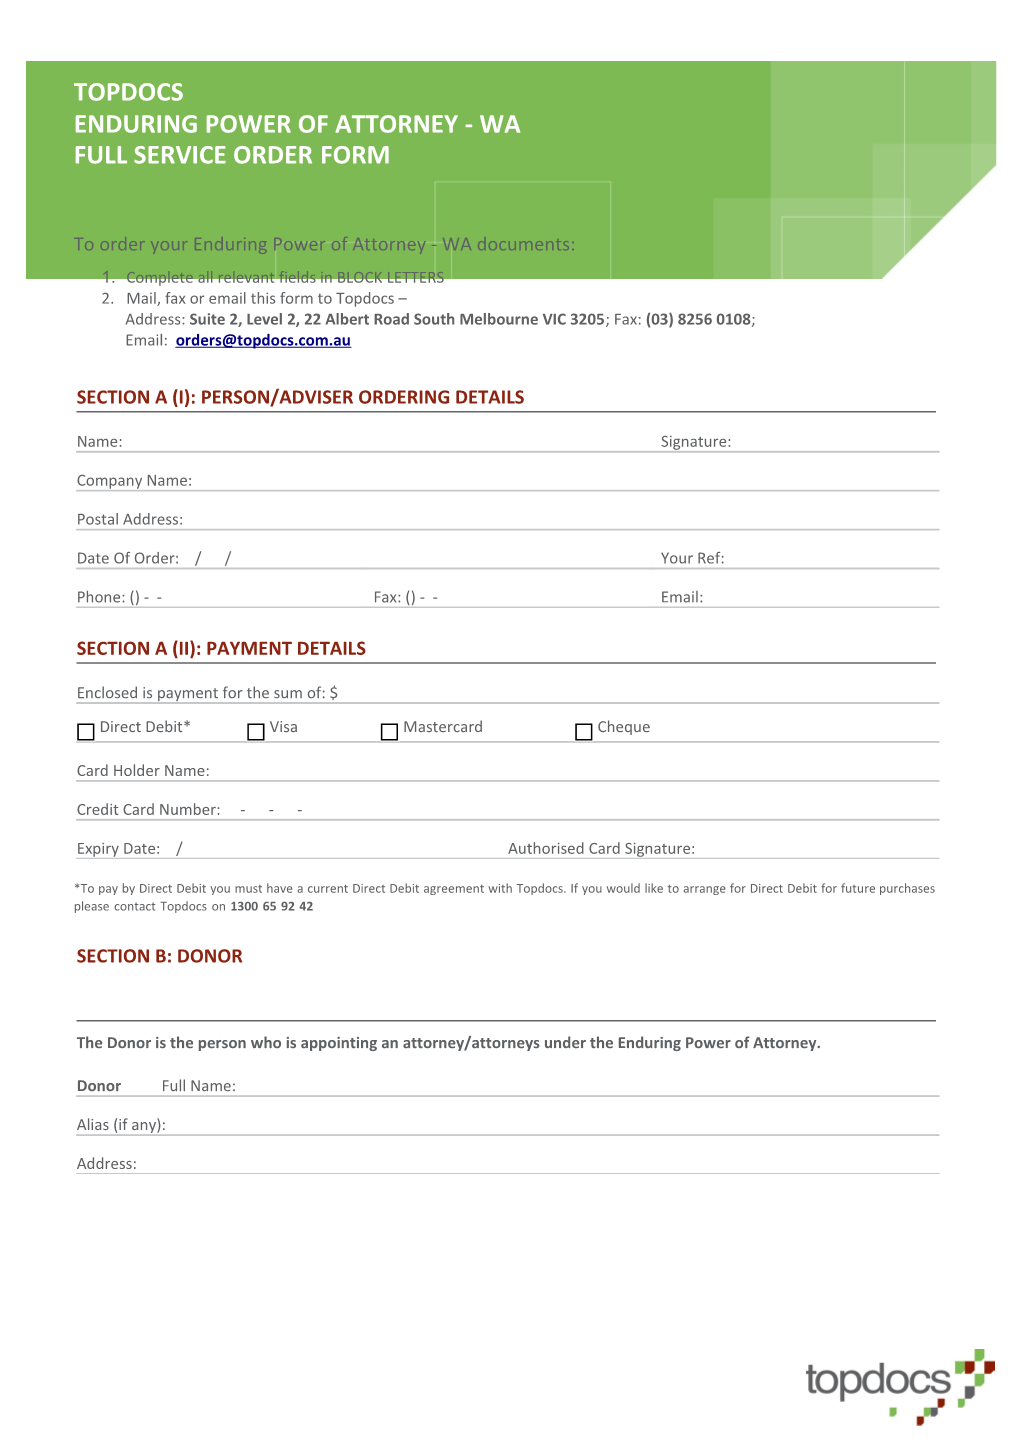 Enduring Power of Attorney- Wa Fullserviceorderform Page 1 of 4